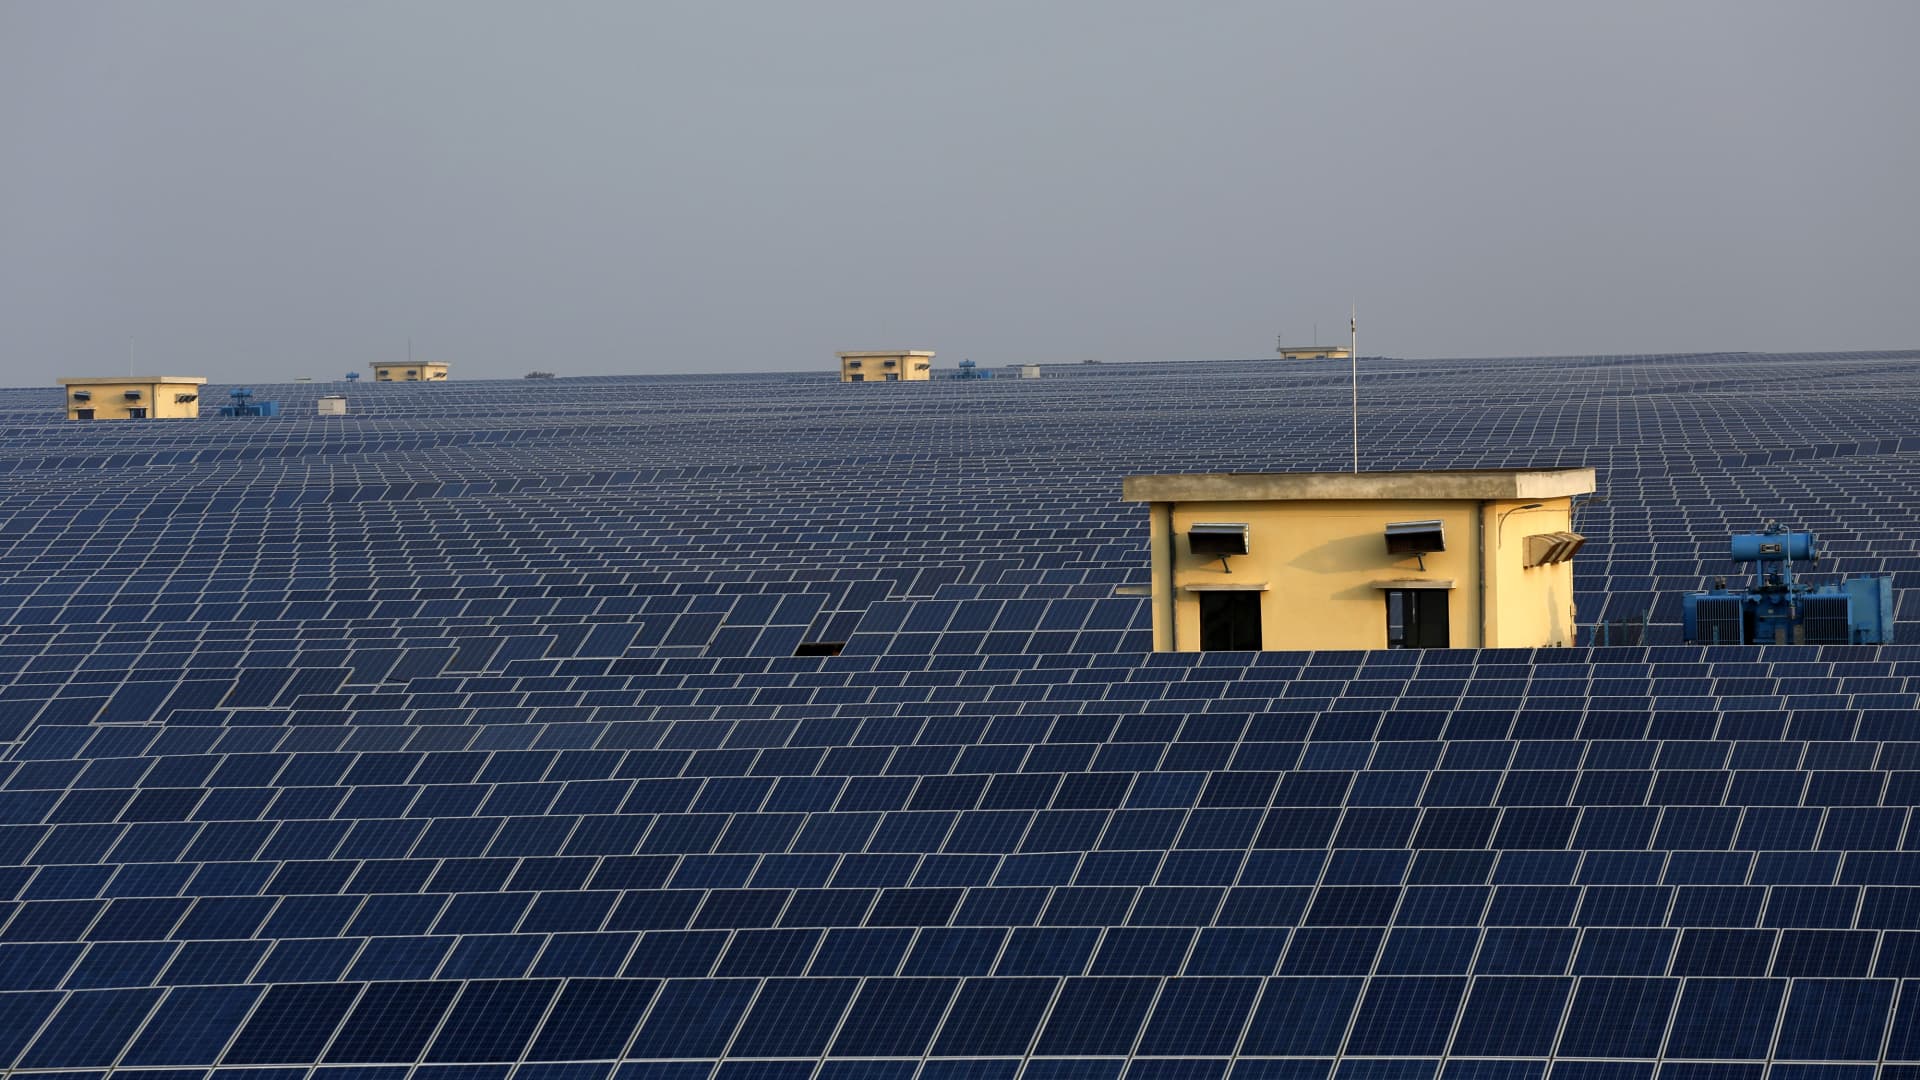 CNBC's Inside India newsletter: A $270 billion gamble on green?